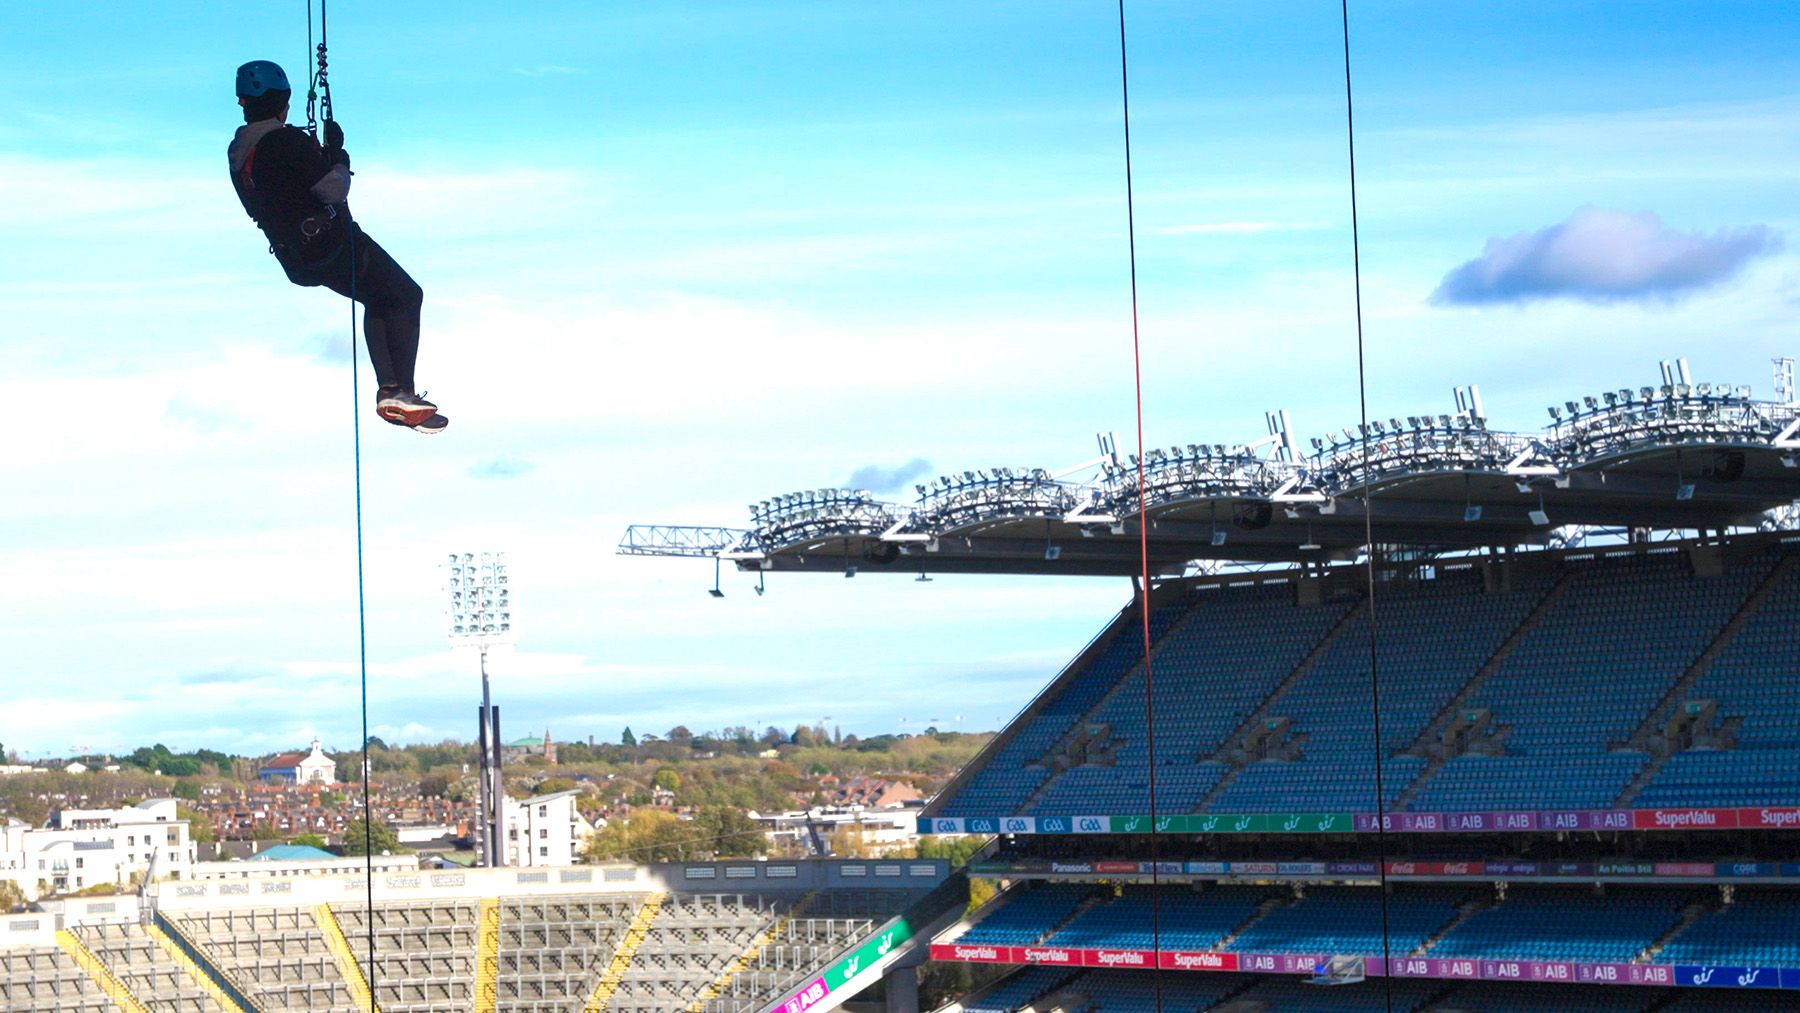 Photo of person abseiling down rope, with Croke Park stadium visible behind.